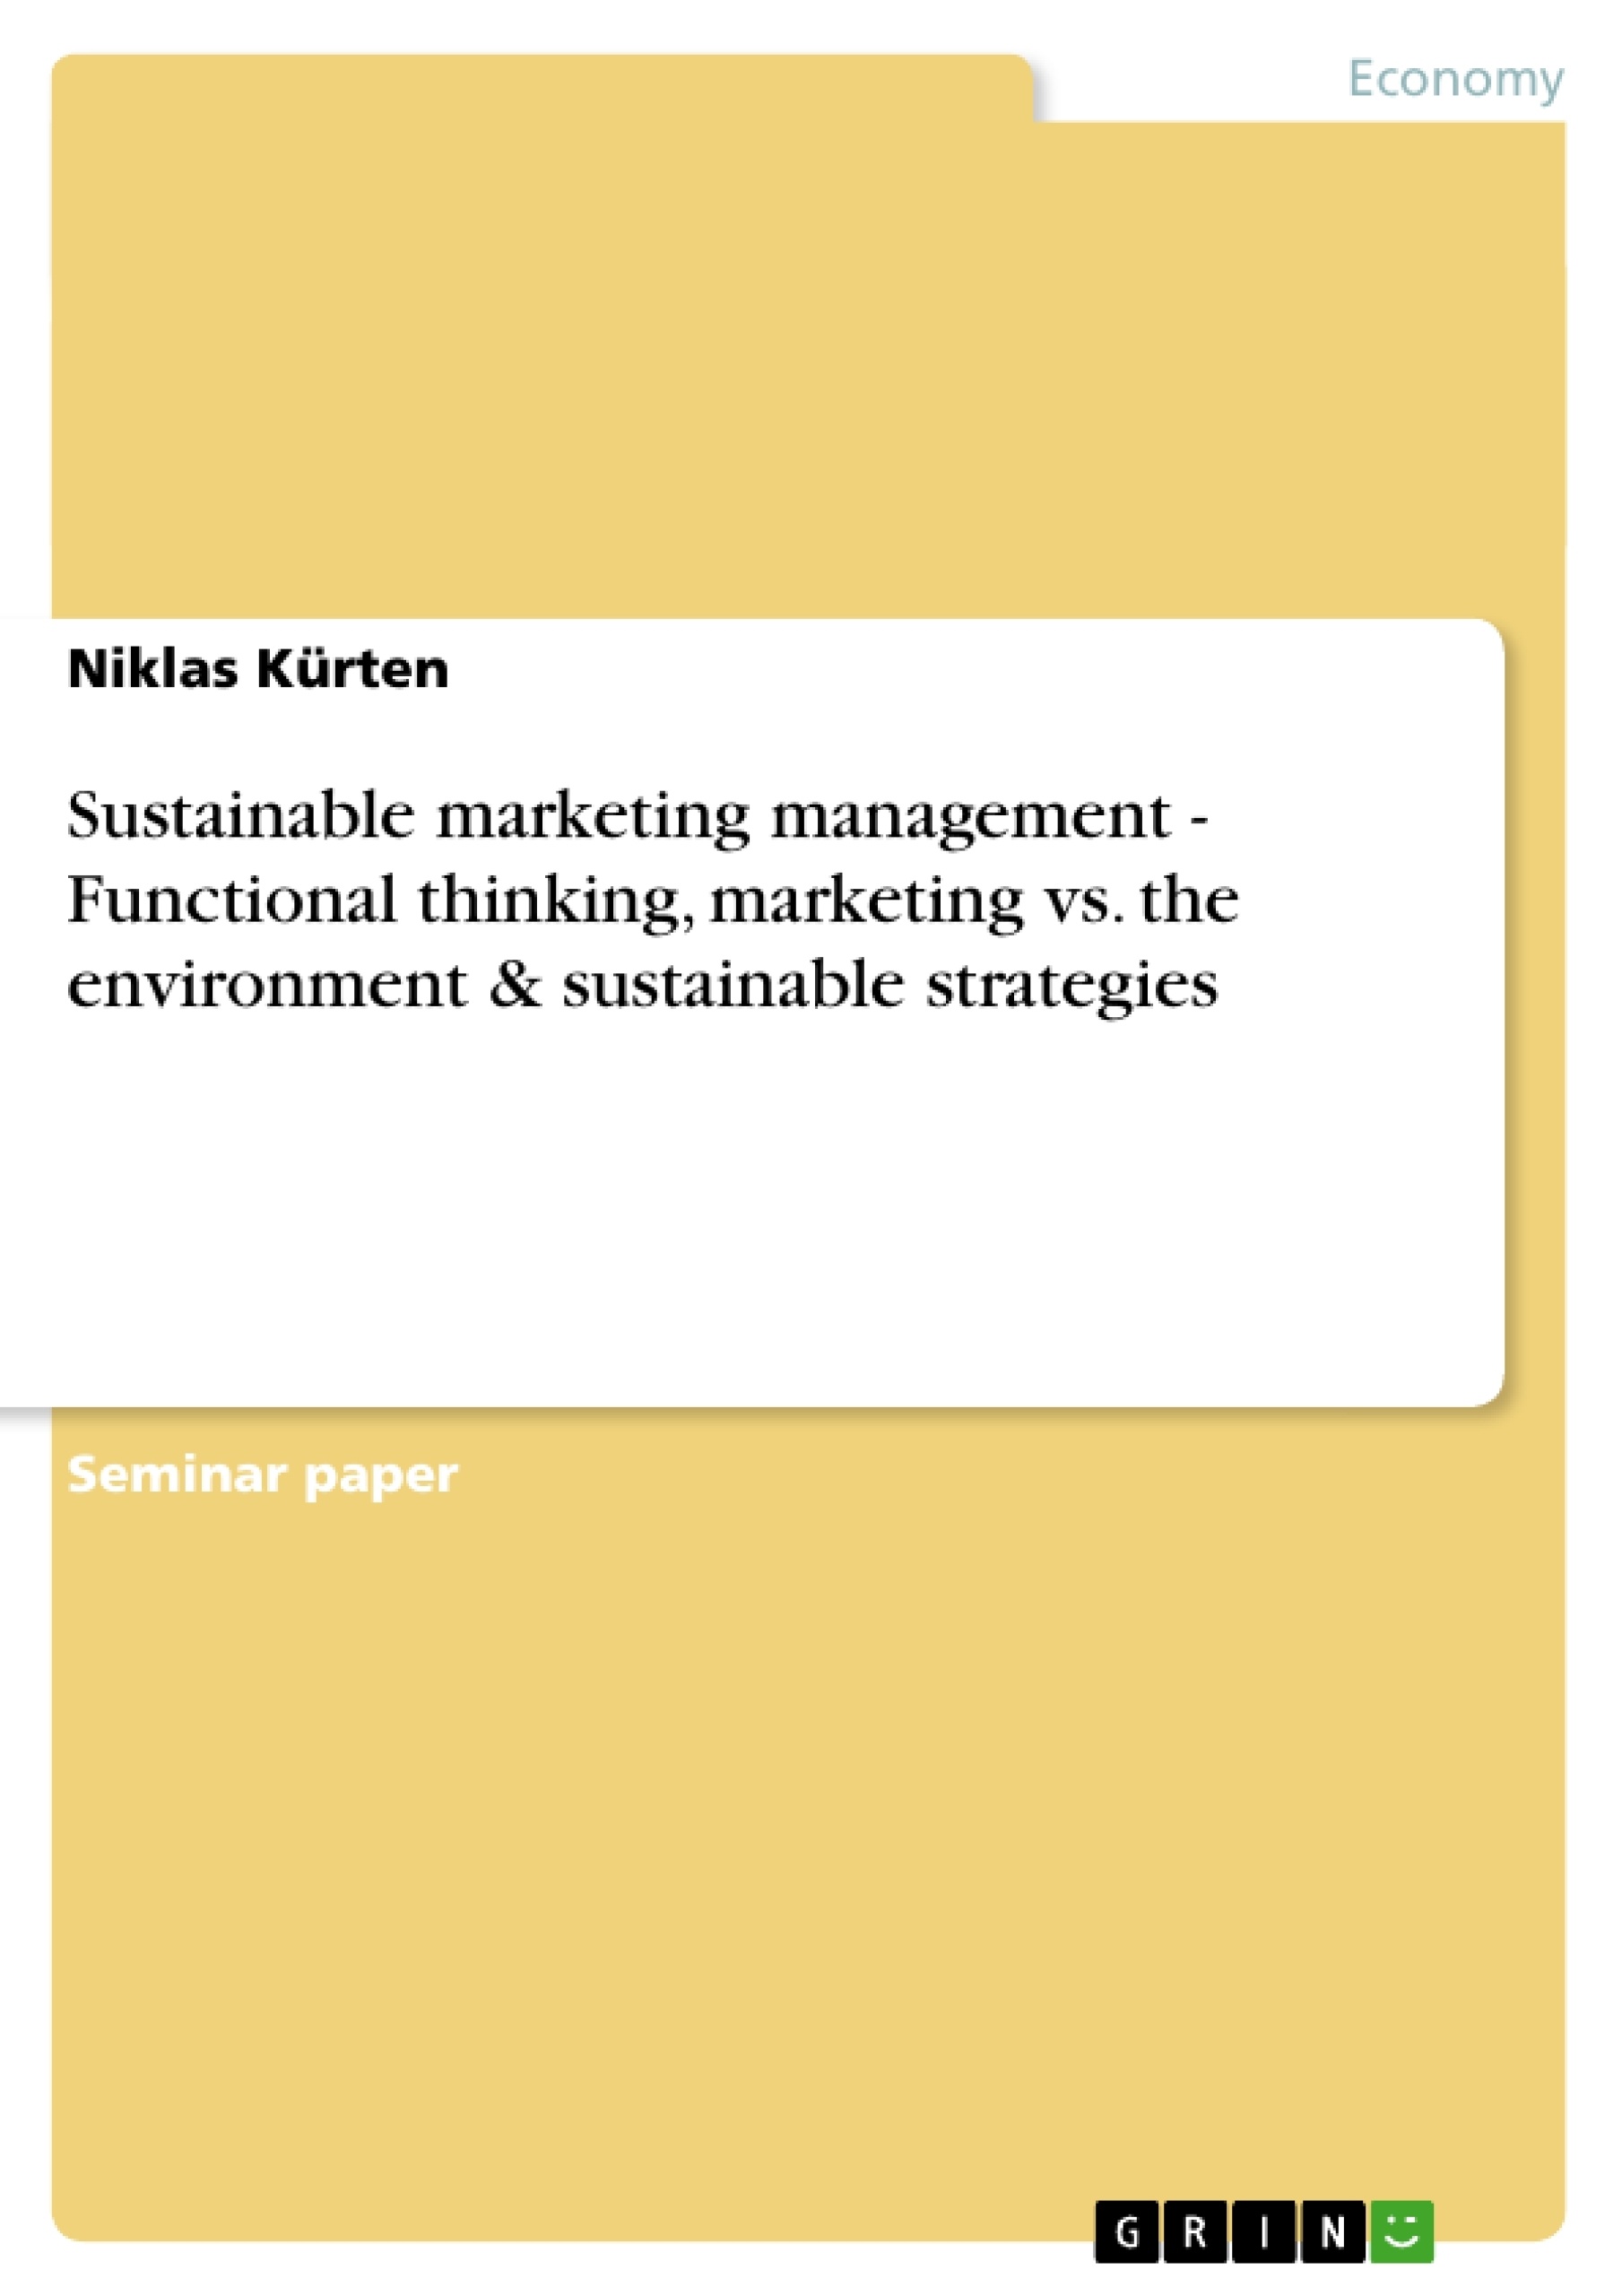 Título: Sustainable marketing management  -  Functional thinking, marketing vs. the environment & sustainable strategies